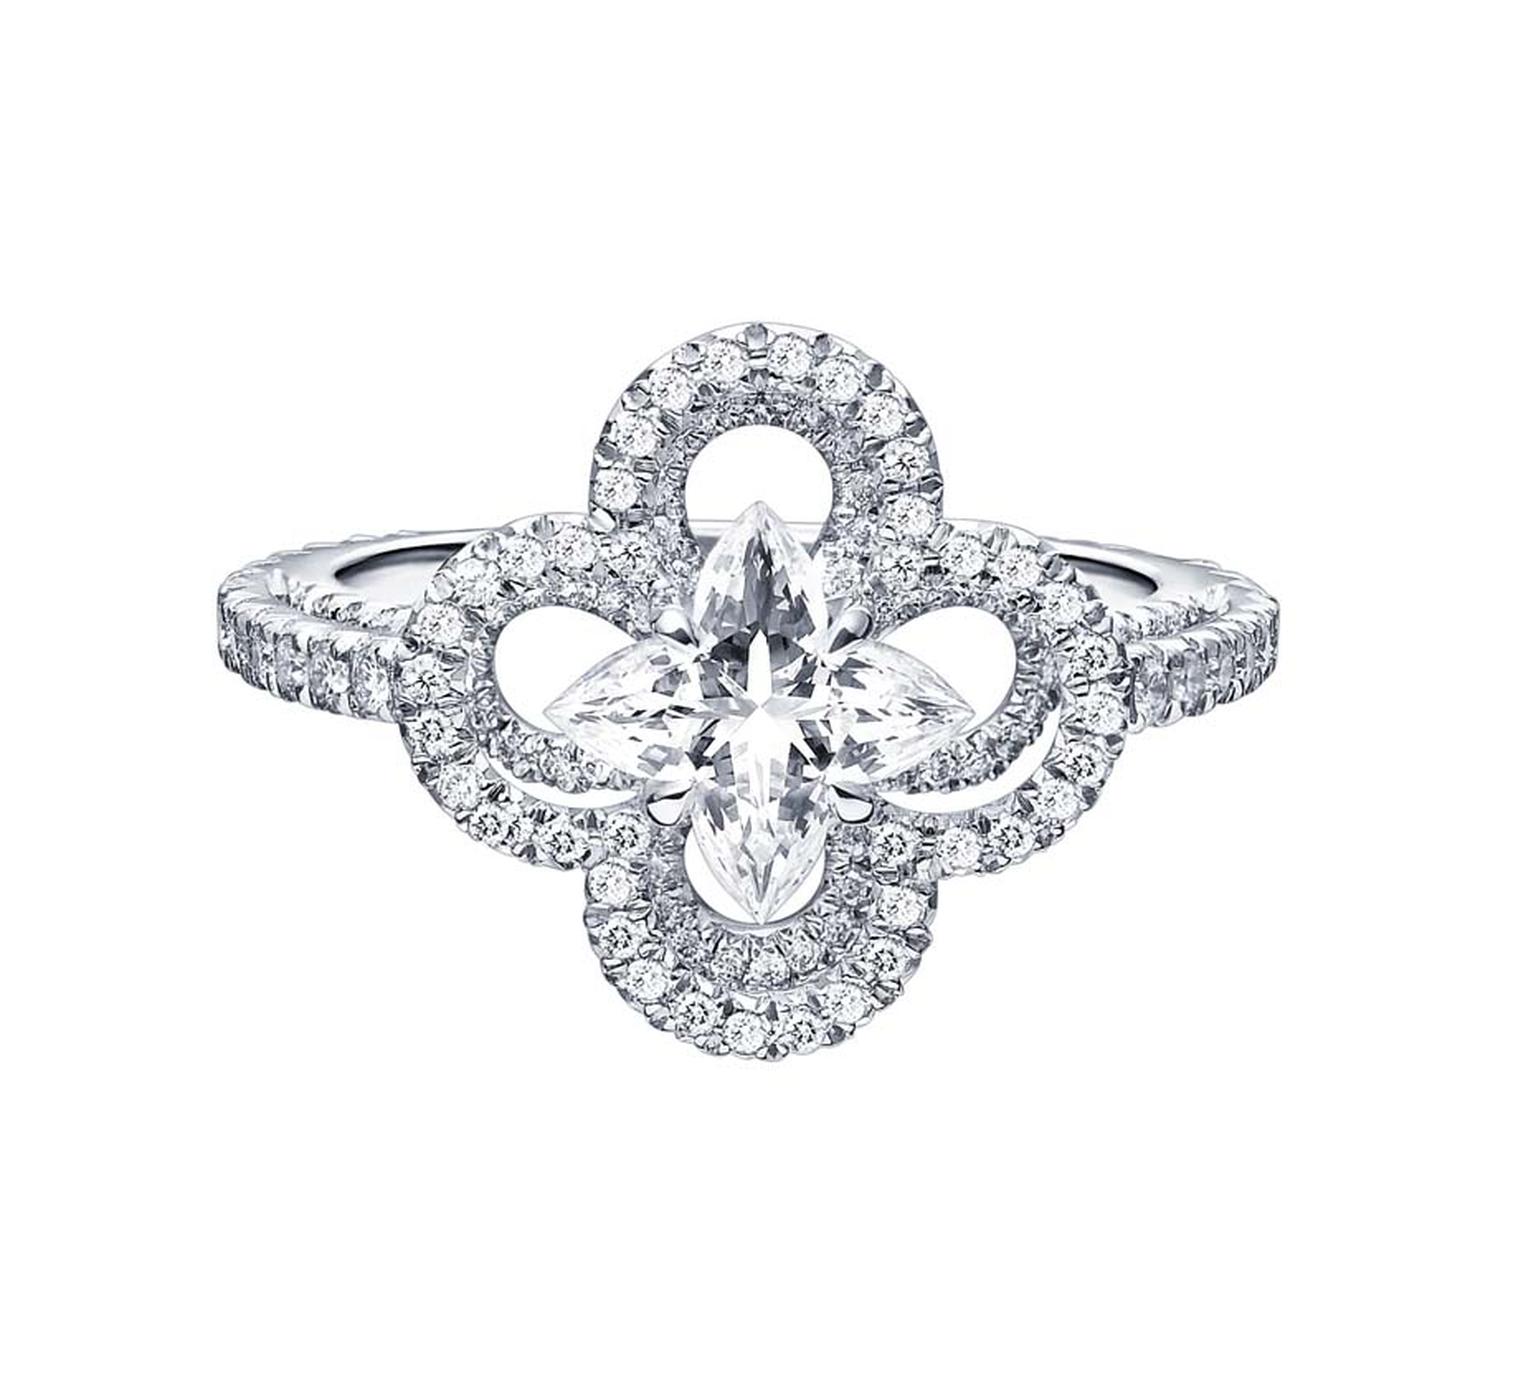 Floral engagement rings: petal perfect diamond rings to match the ...